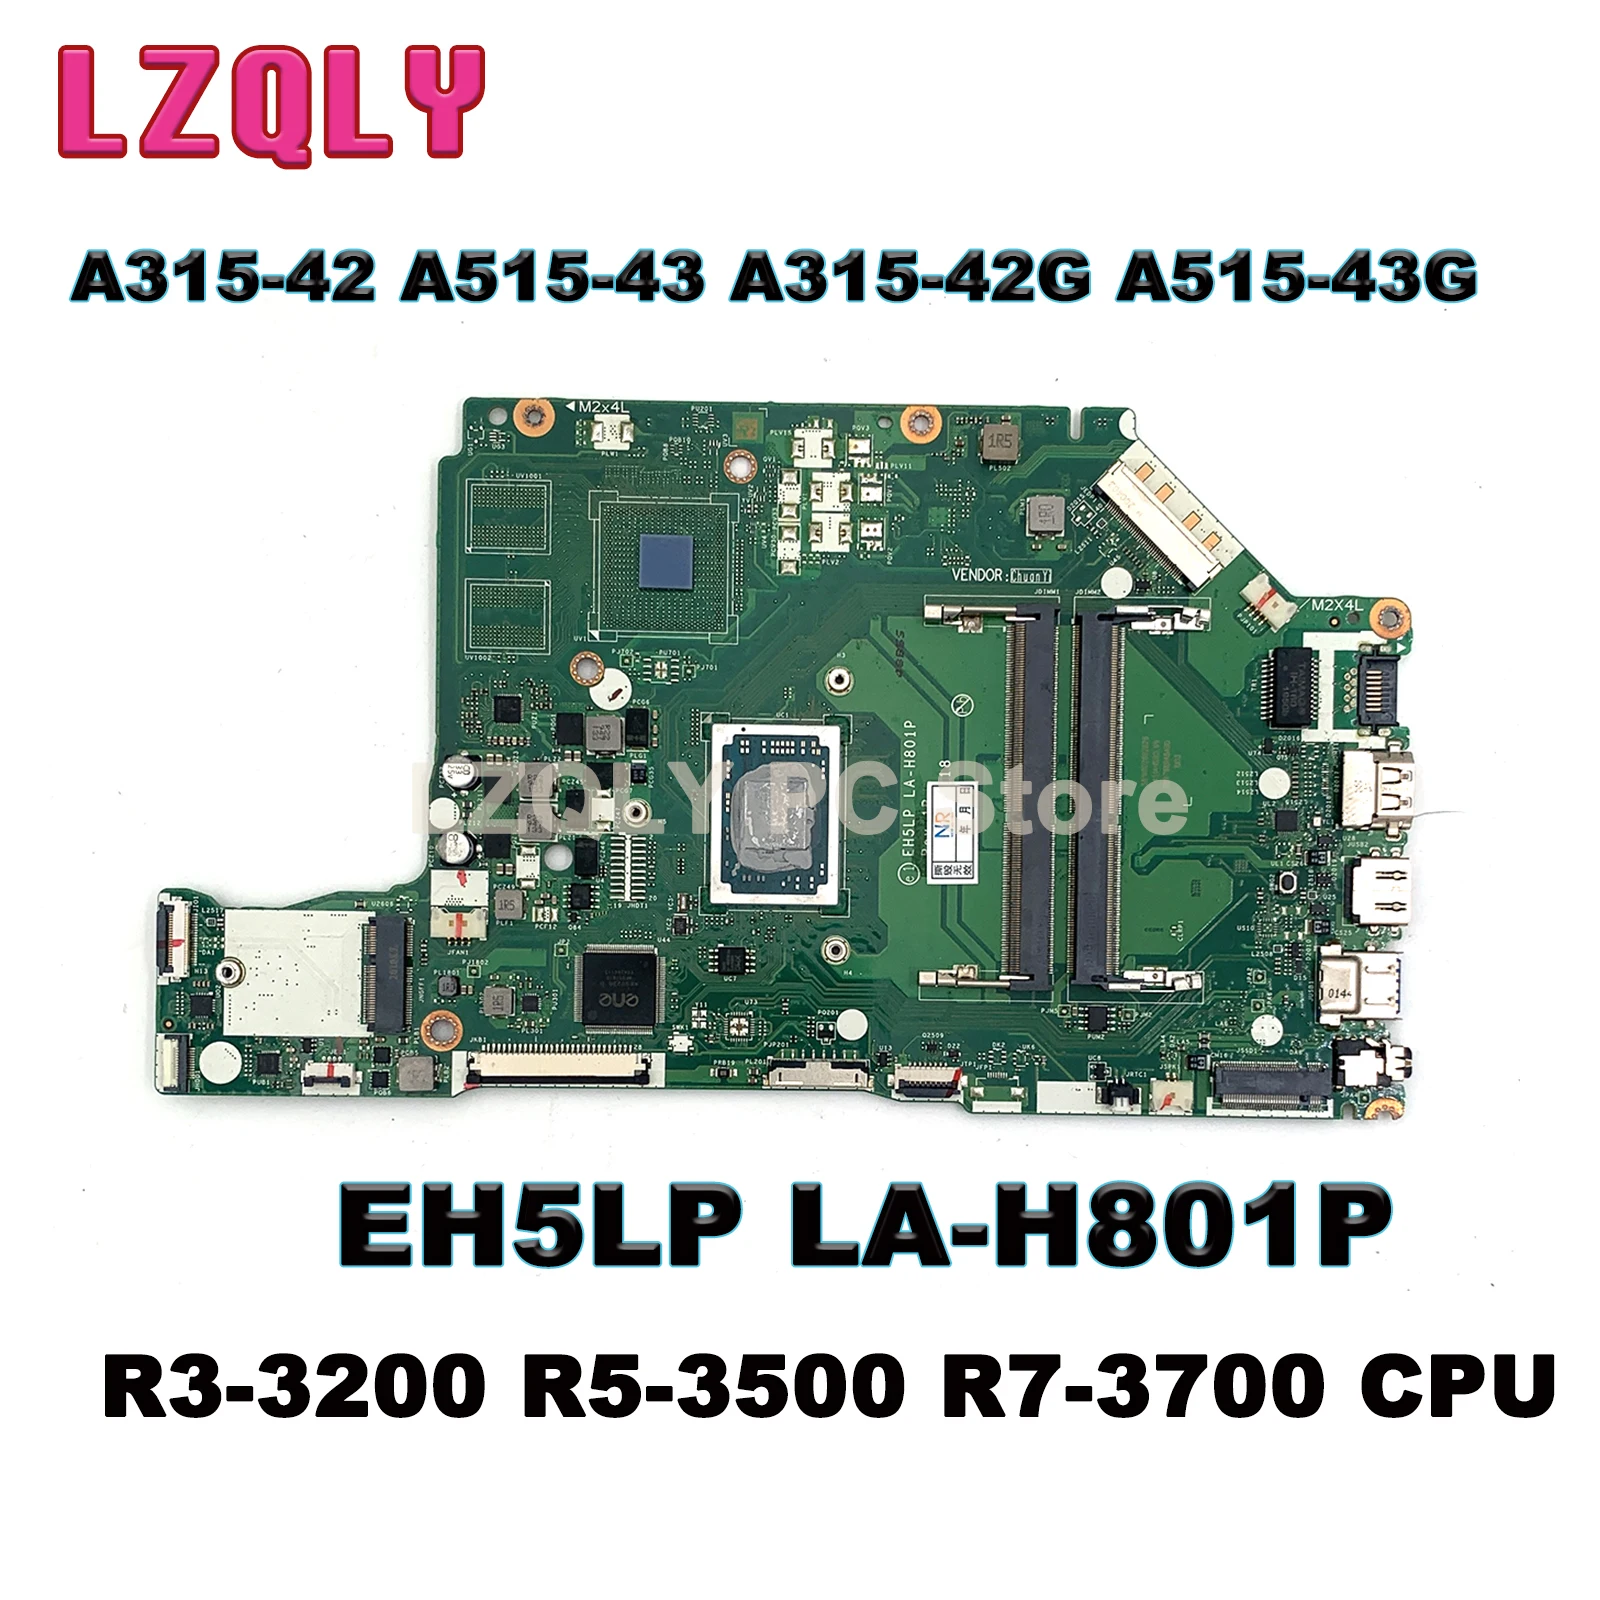 

For Acer Aspire A315-42 A515-43 A315-42G A515-43G Laptop Motherboard EH5LP LA-H801P With AMD 300 R3-3200 R5-3500 R7-3700 CPU UMA